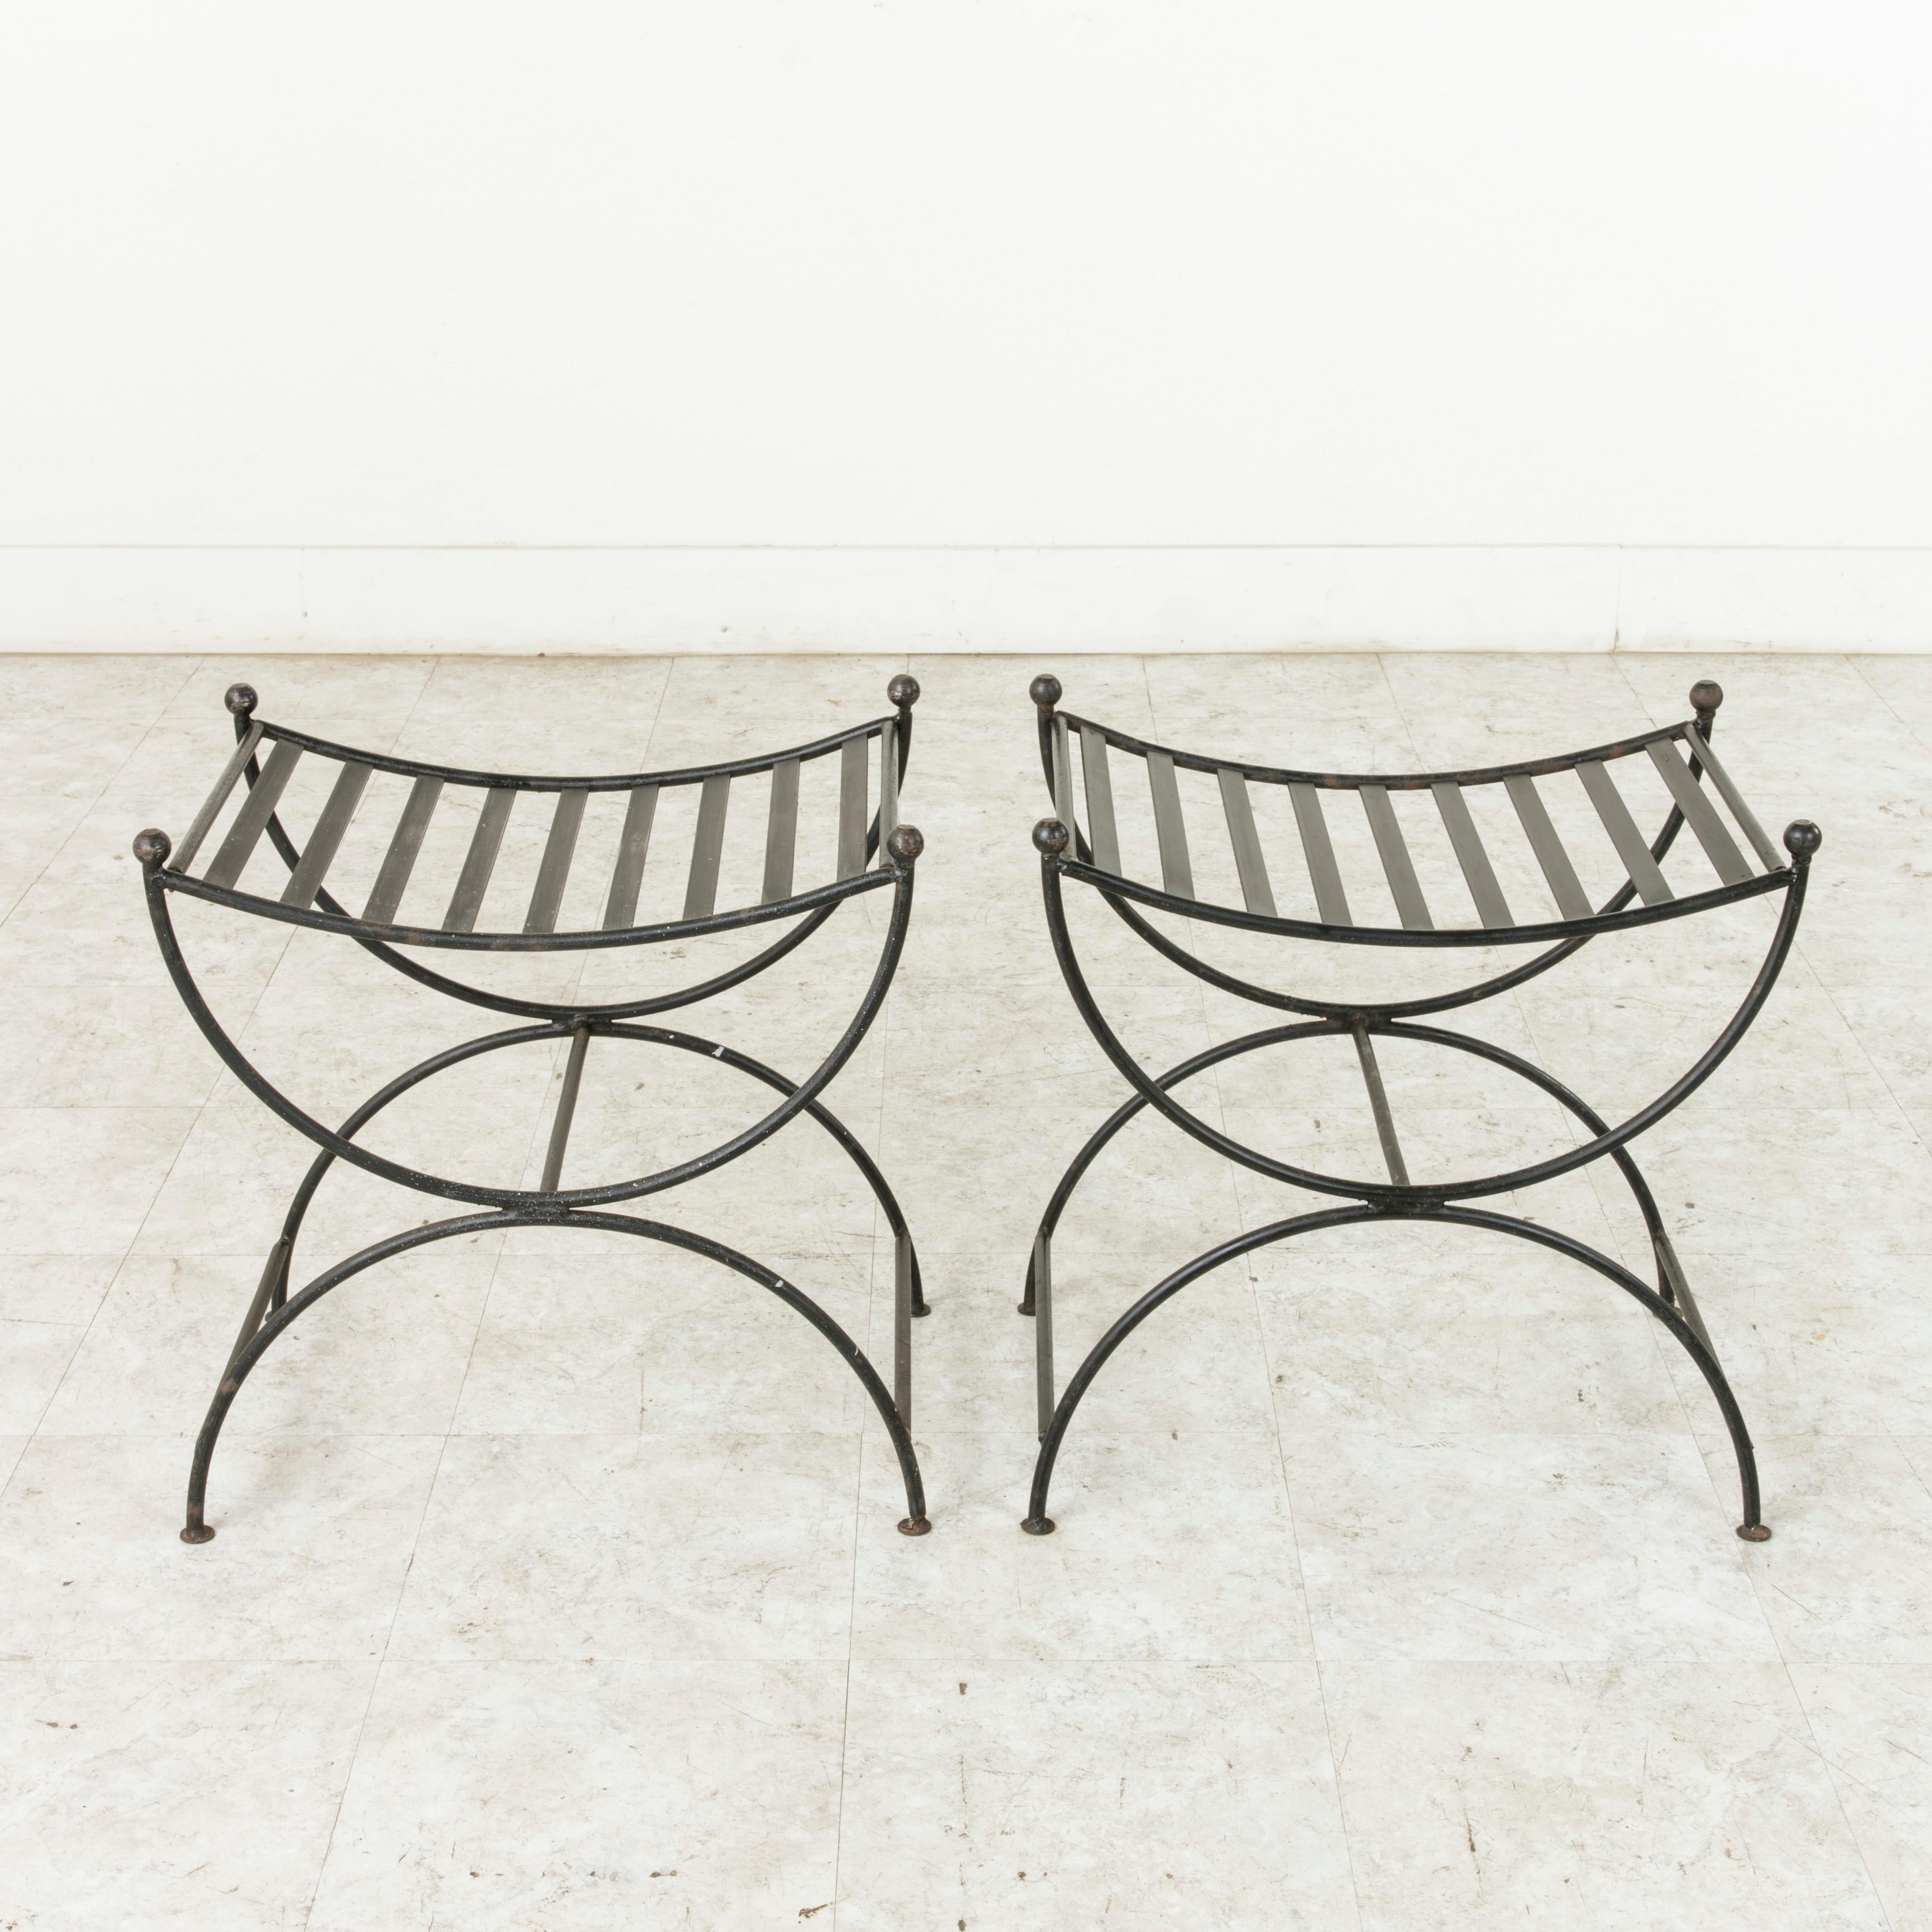 This pair of mid-20th century French iron banquettes, benches, or stools, features a slatted seat supported by opposing half circles that form the legs. Iron bars extend between the legs to provide additional stability. Finished with round iron